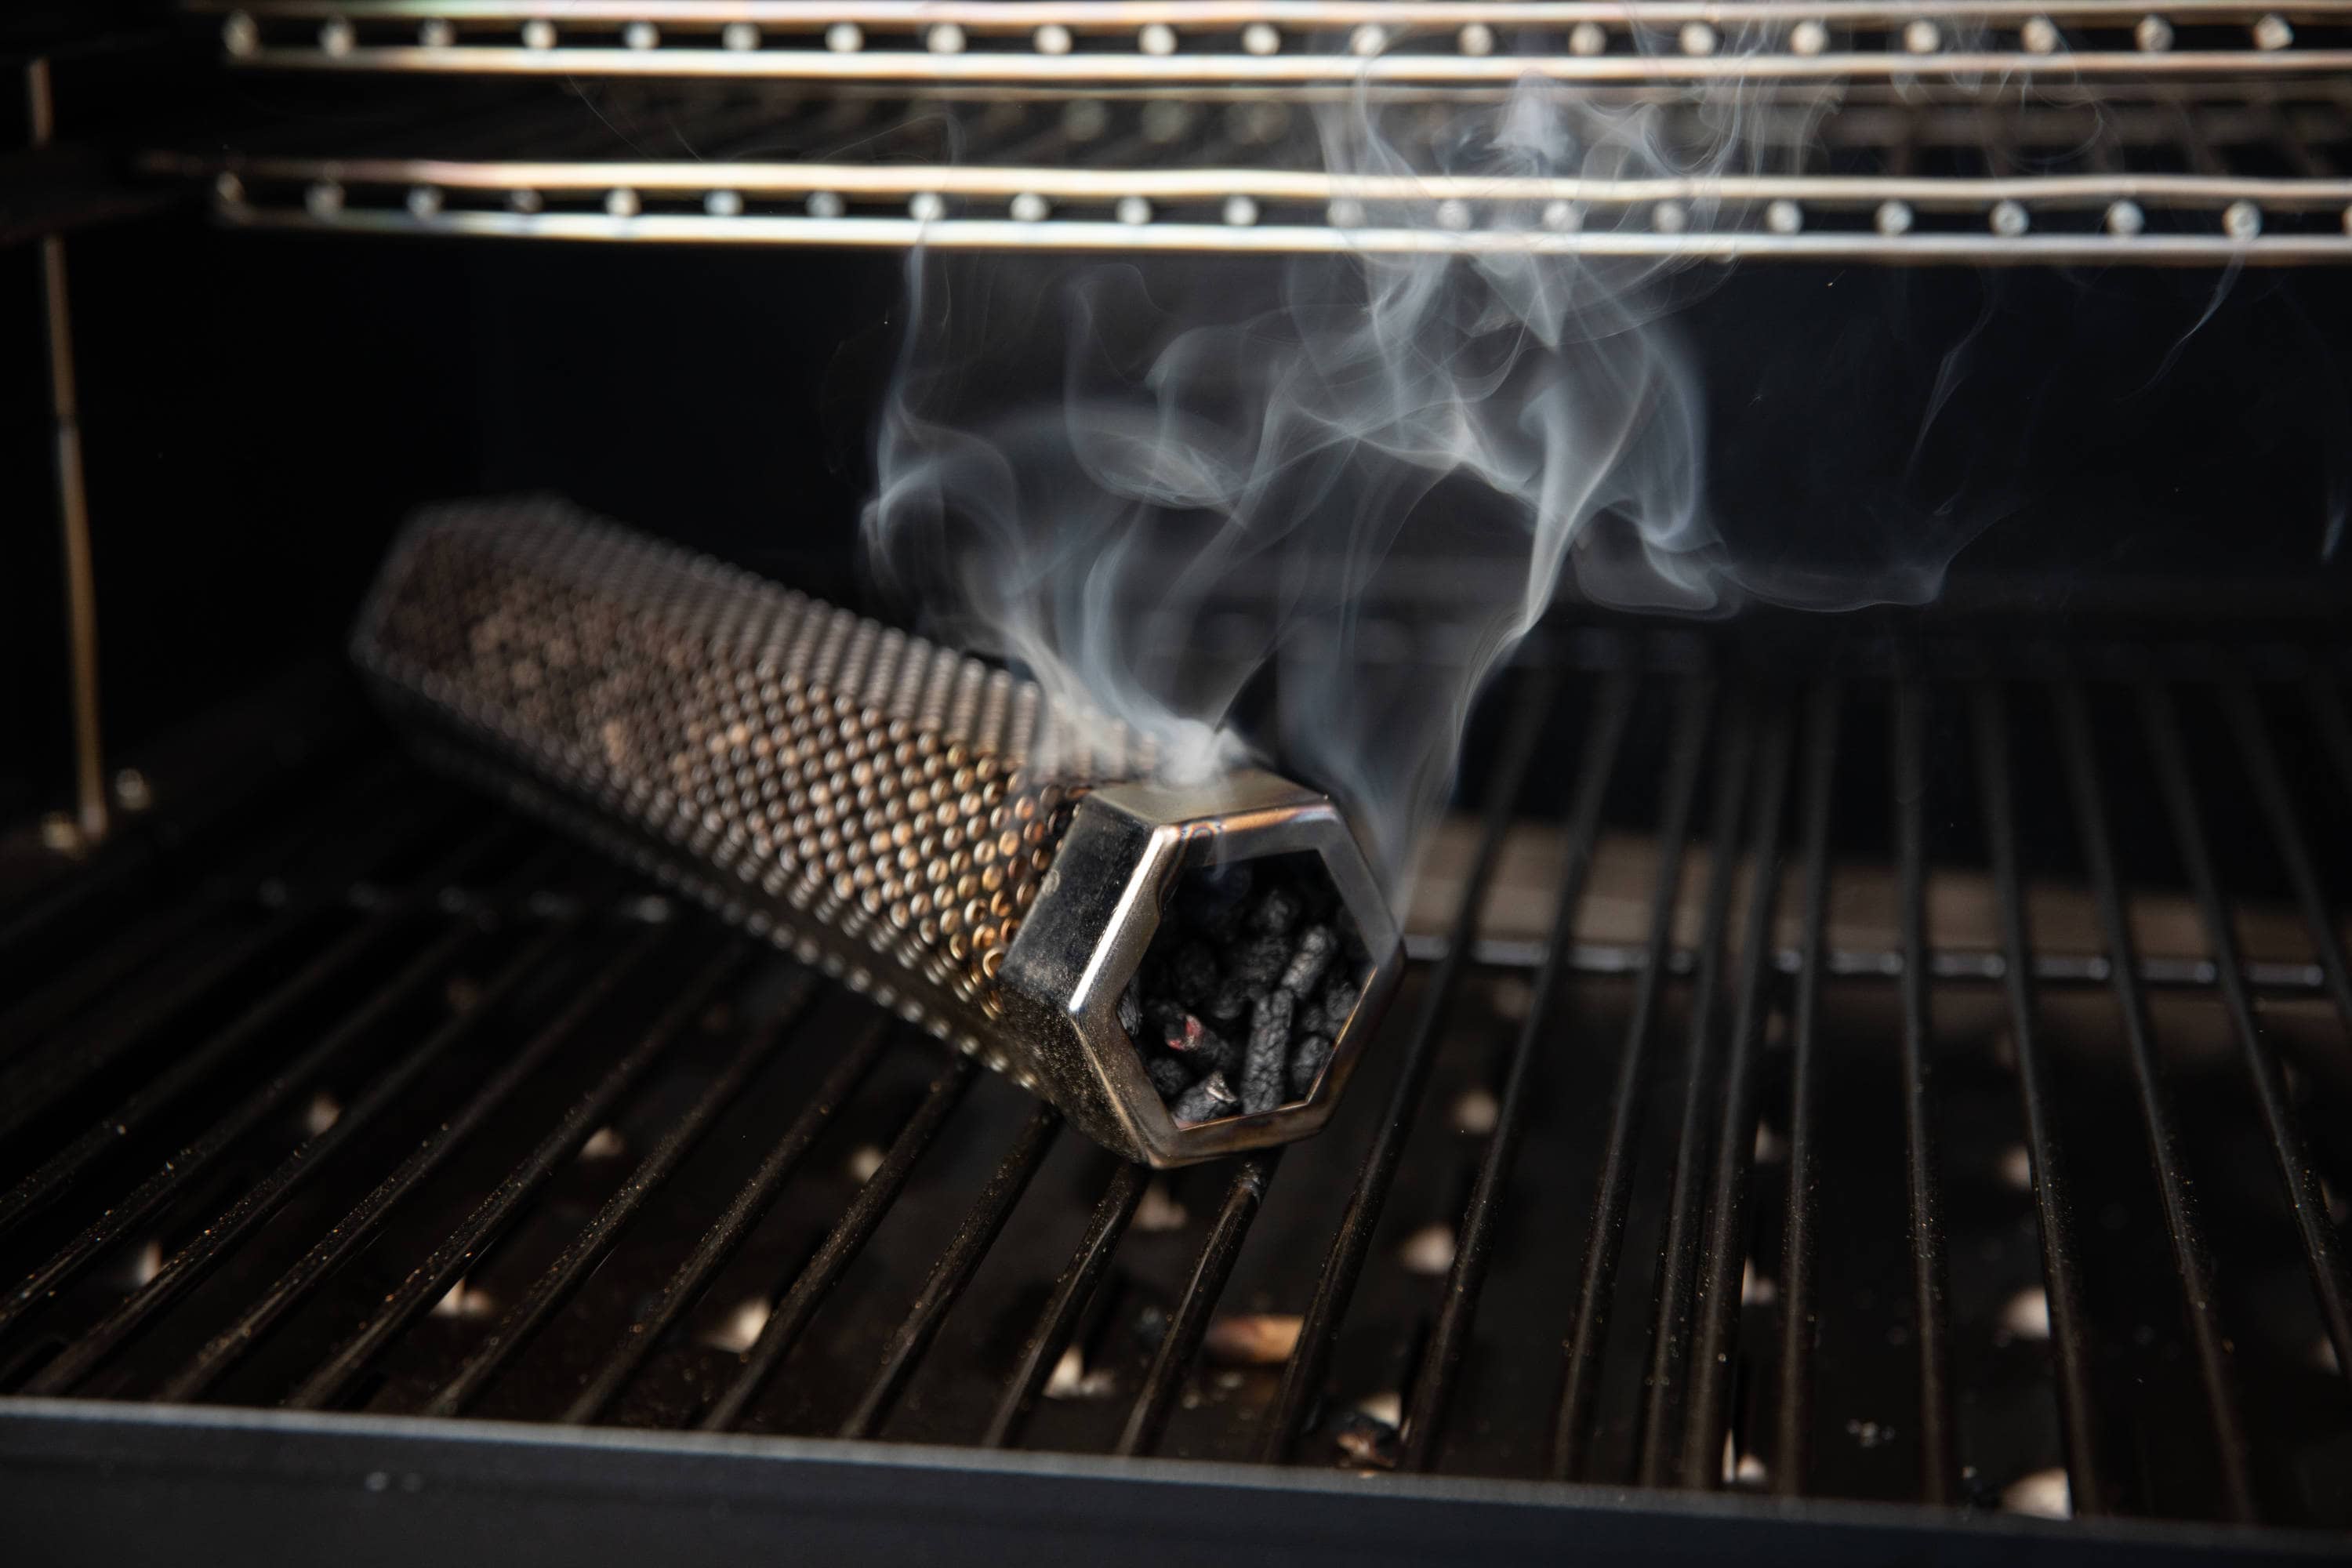 Smoke tube Grilling Tools & Accessories at